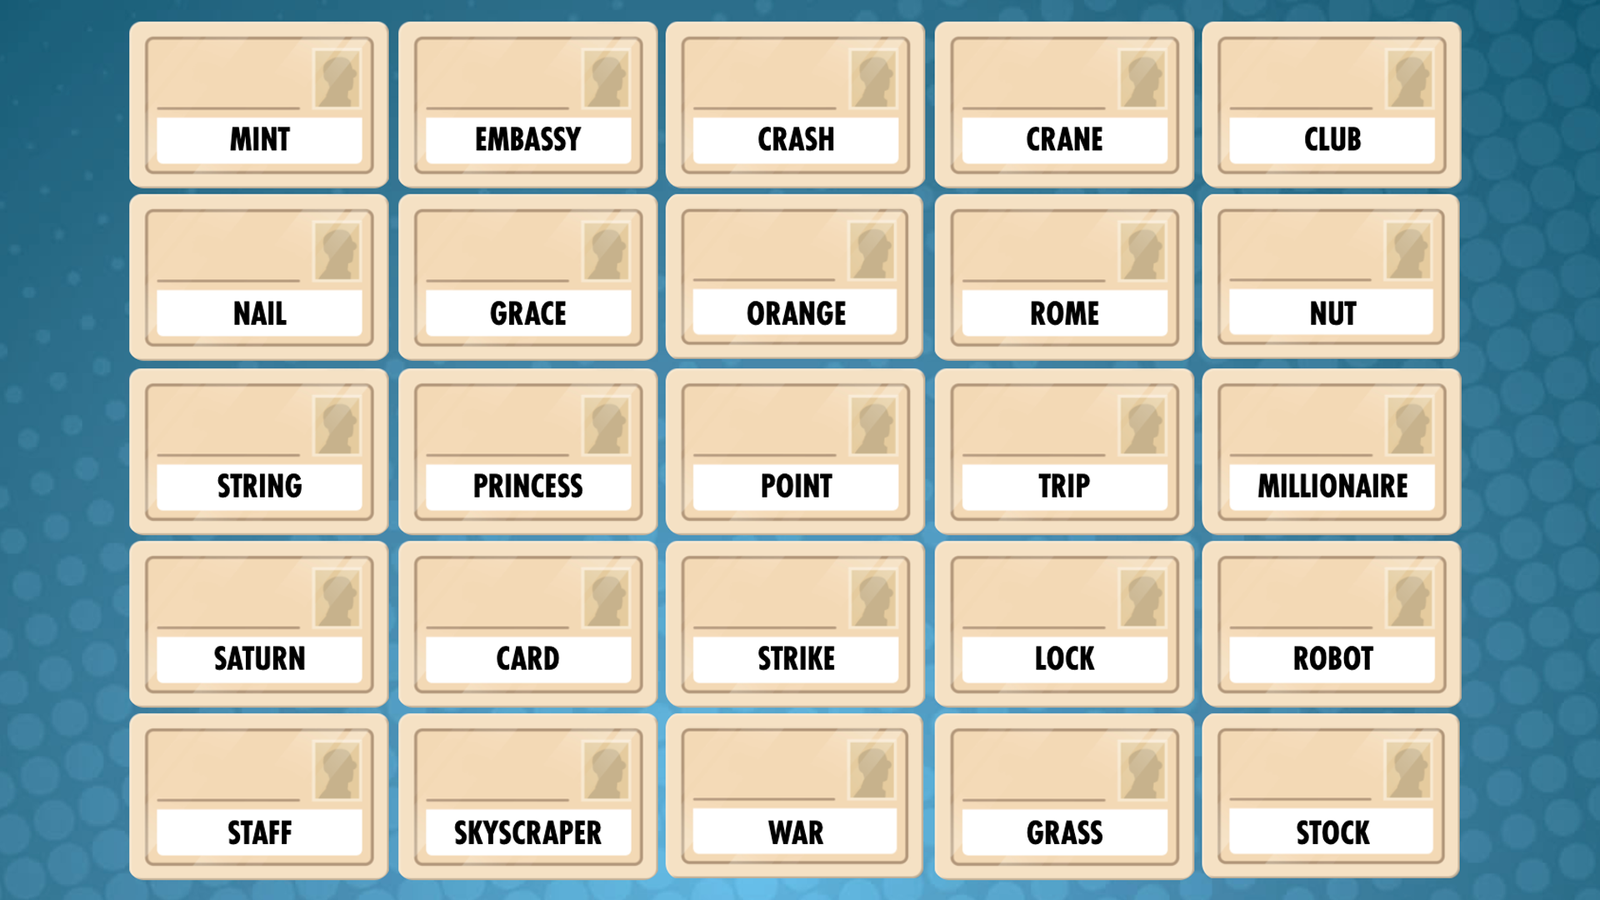 Codenames: Pictures, Board Game